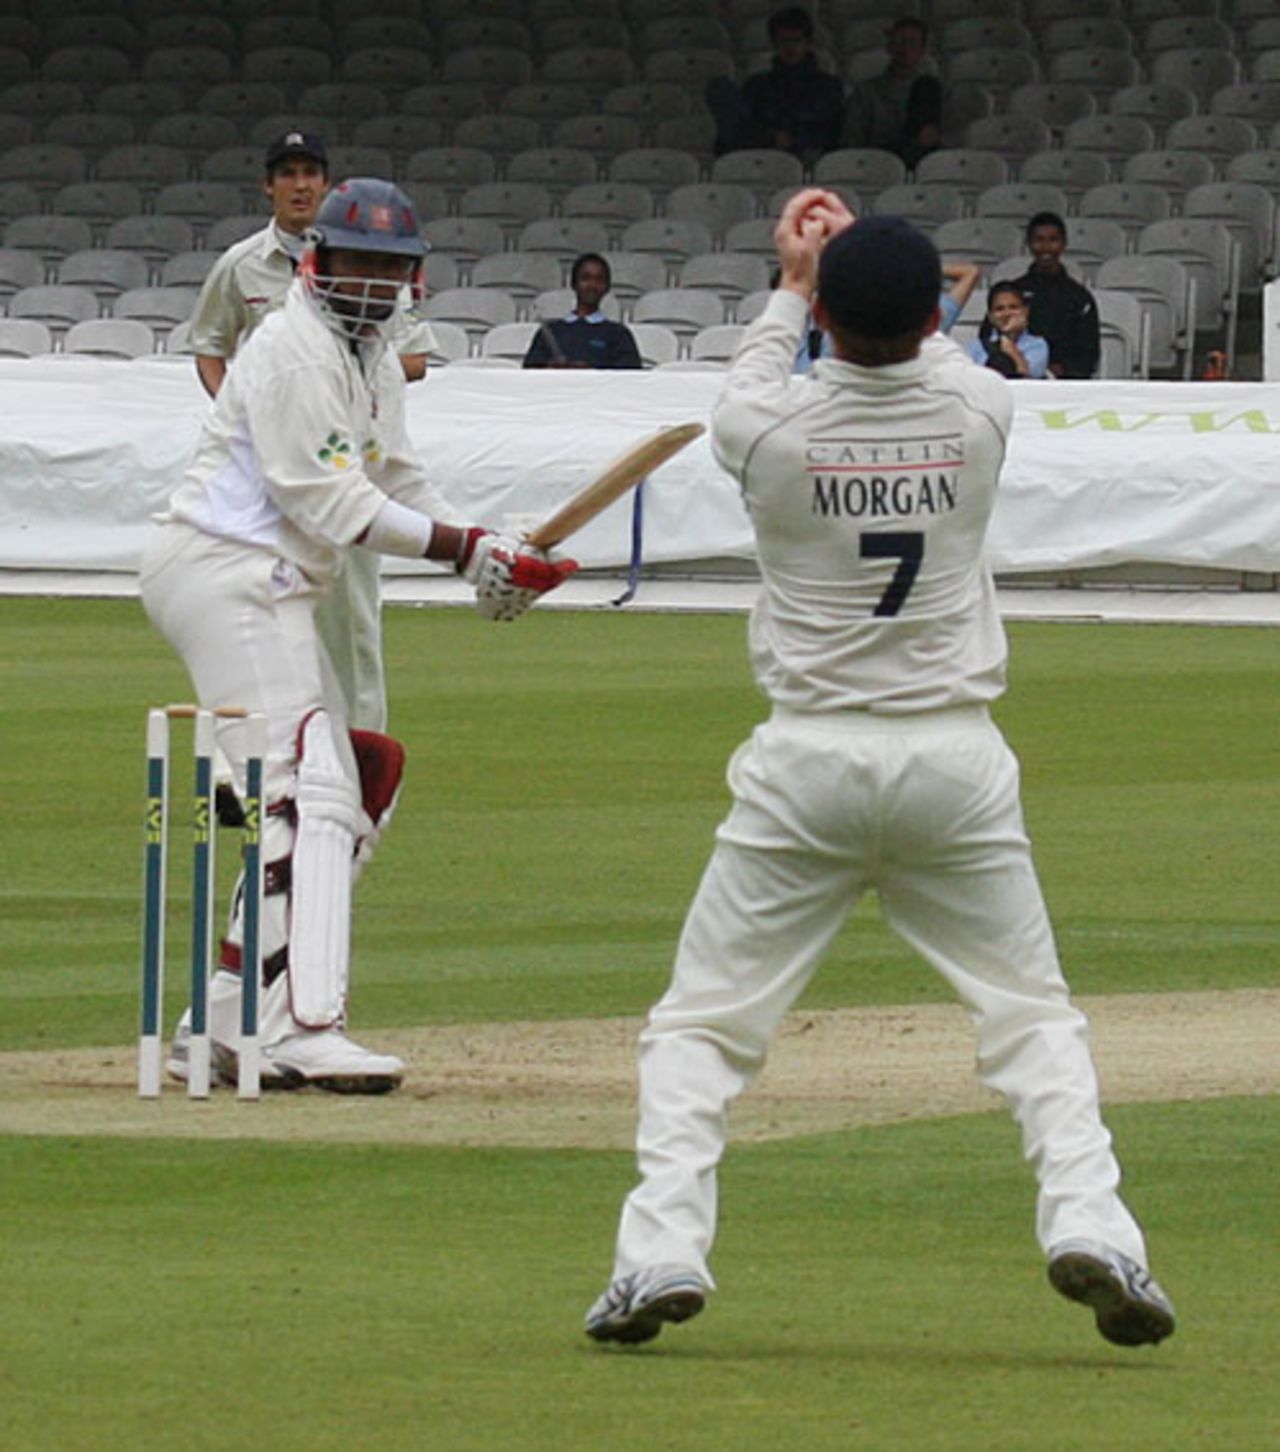 Essex's innings ends as Danish Kaneria is caught by Eoin Morgan to give Tim Murtagh his sixth wicket, Middlesex v Essex, Lord's, June 6, 2008